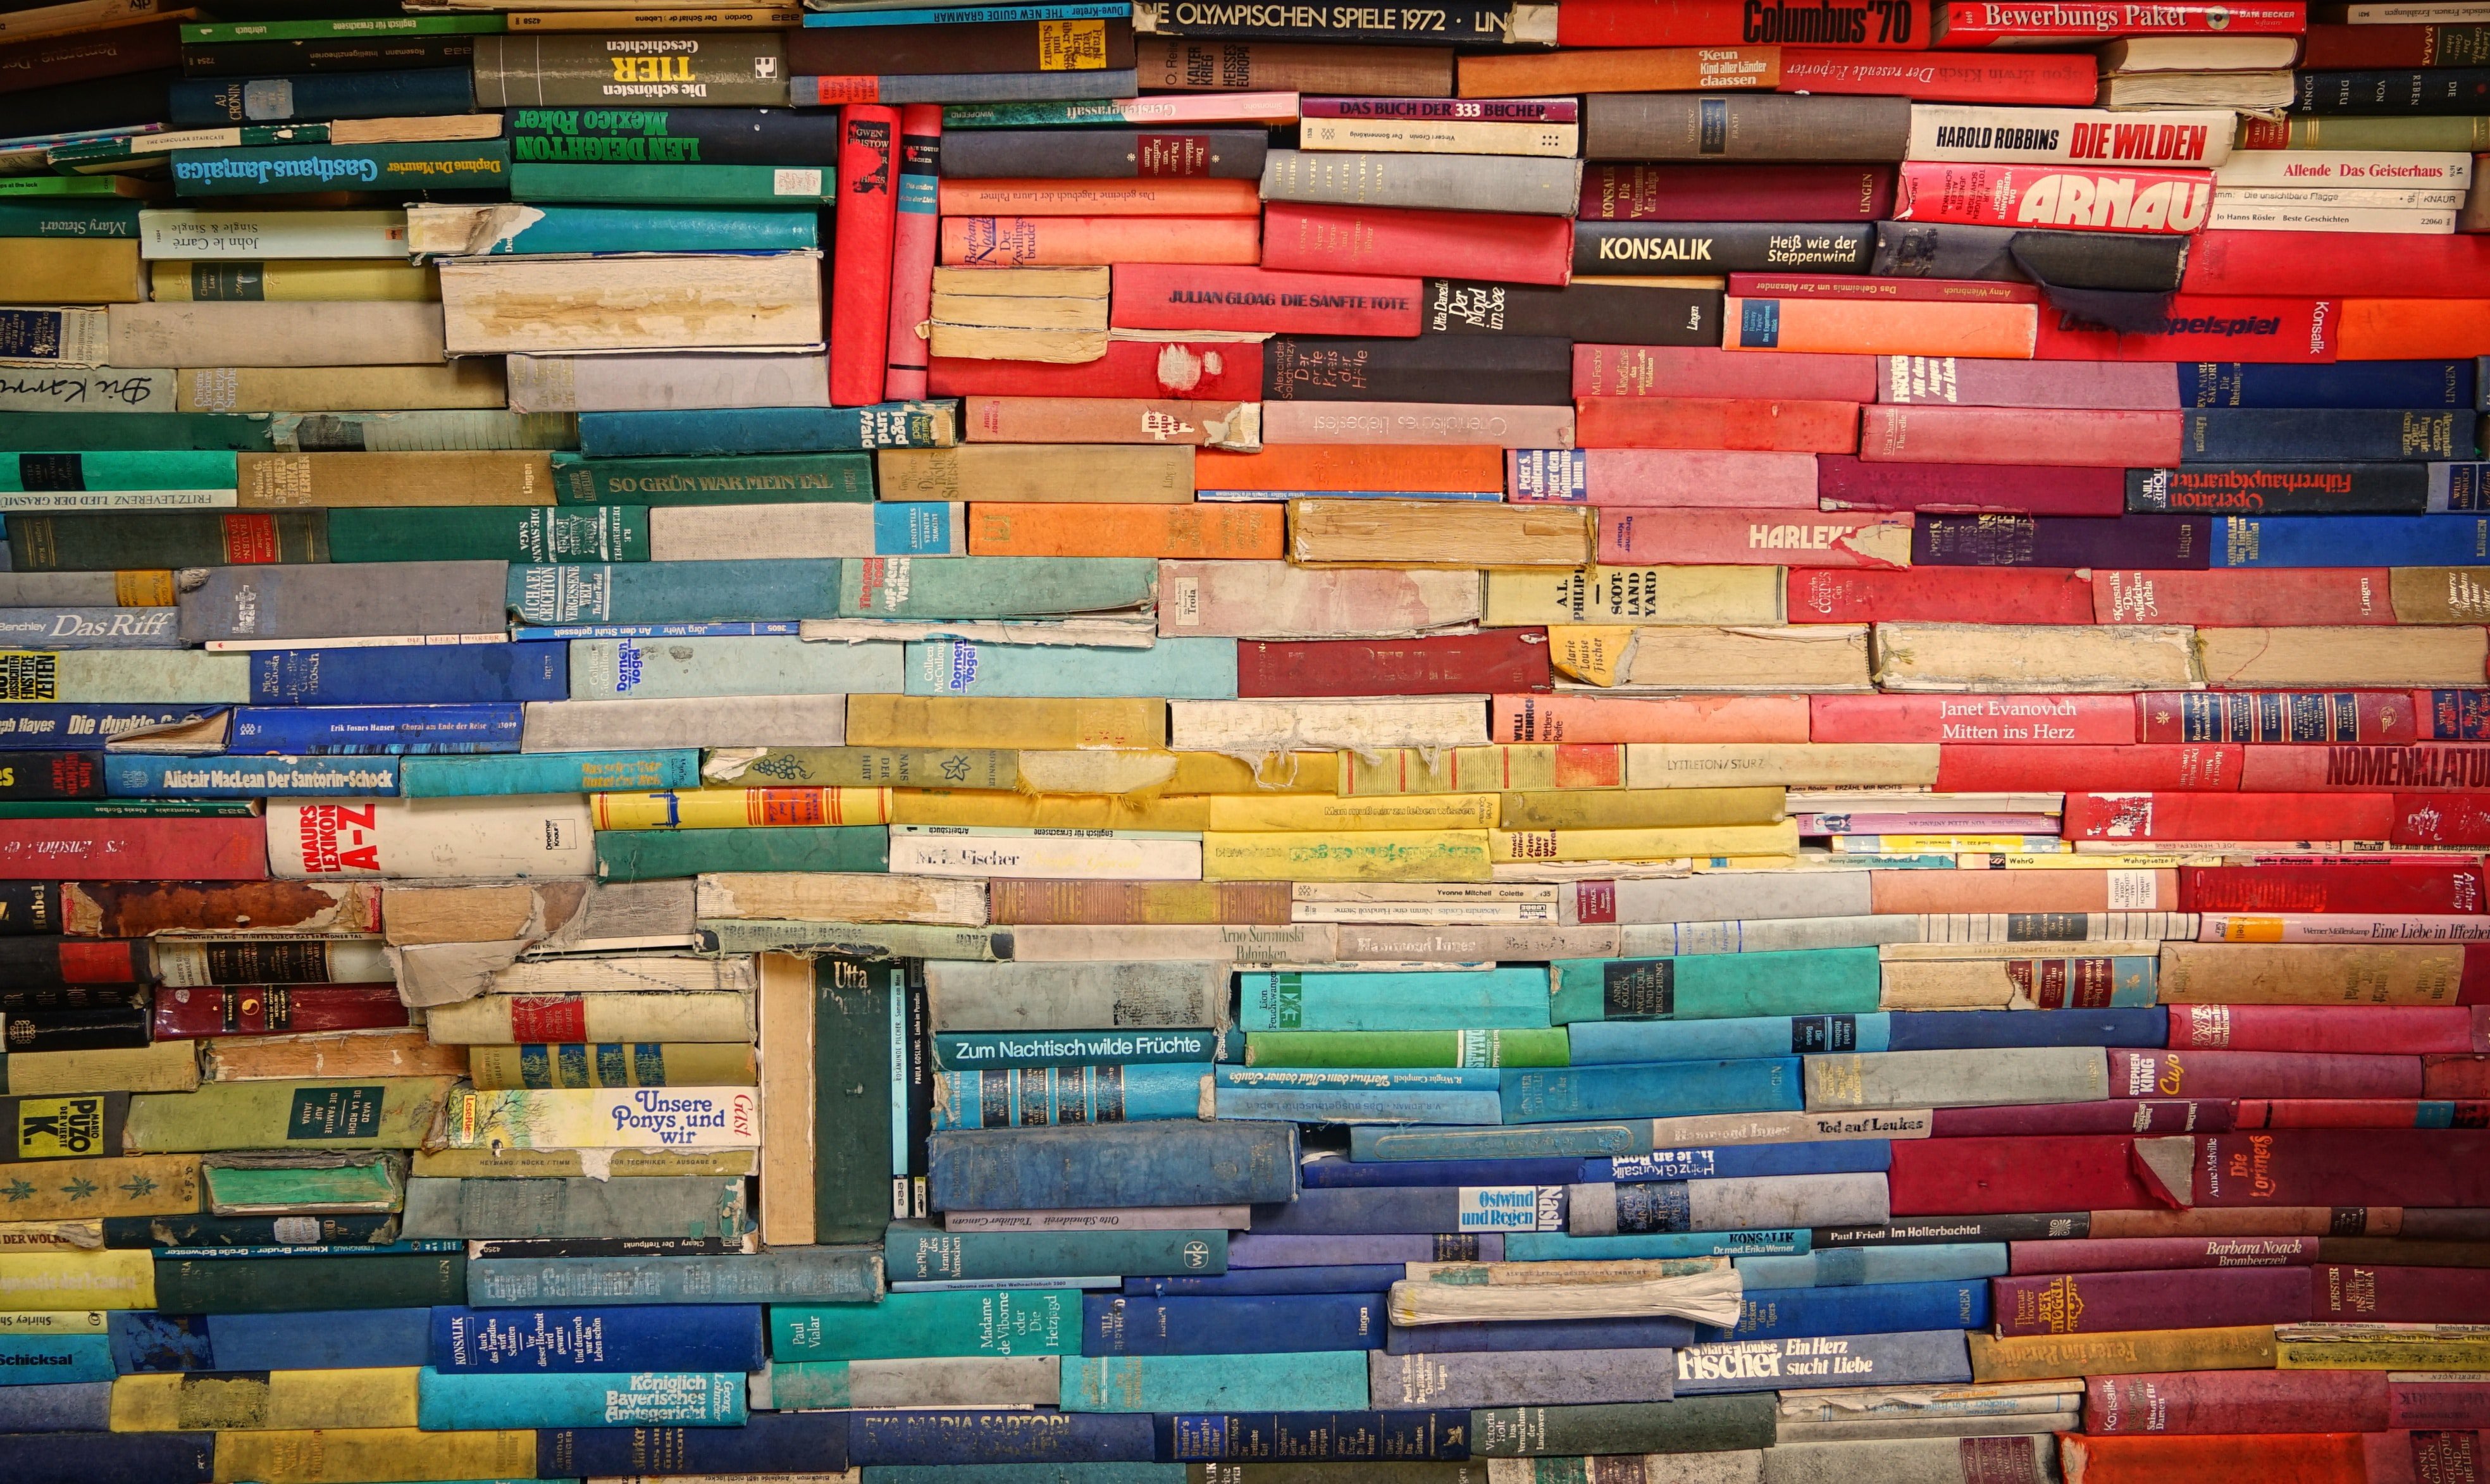 Books neatly arranged in a pile against a wall, representing a wealth of information and intellectual exploration.